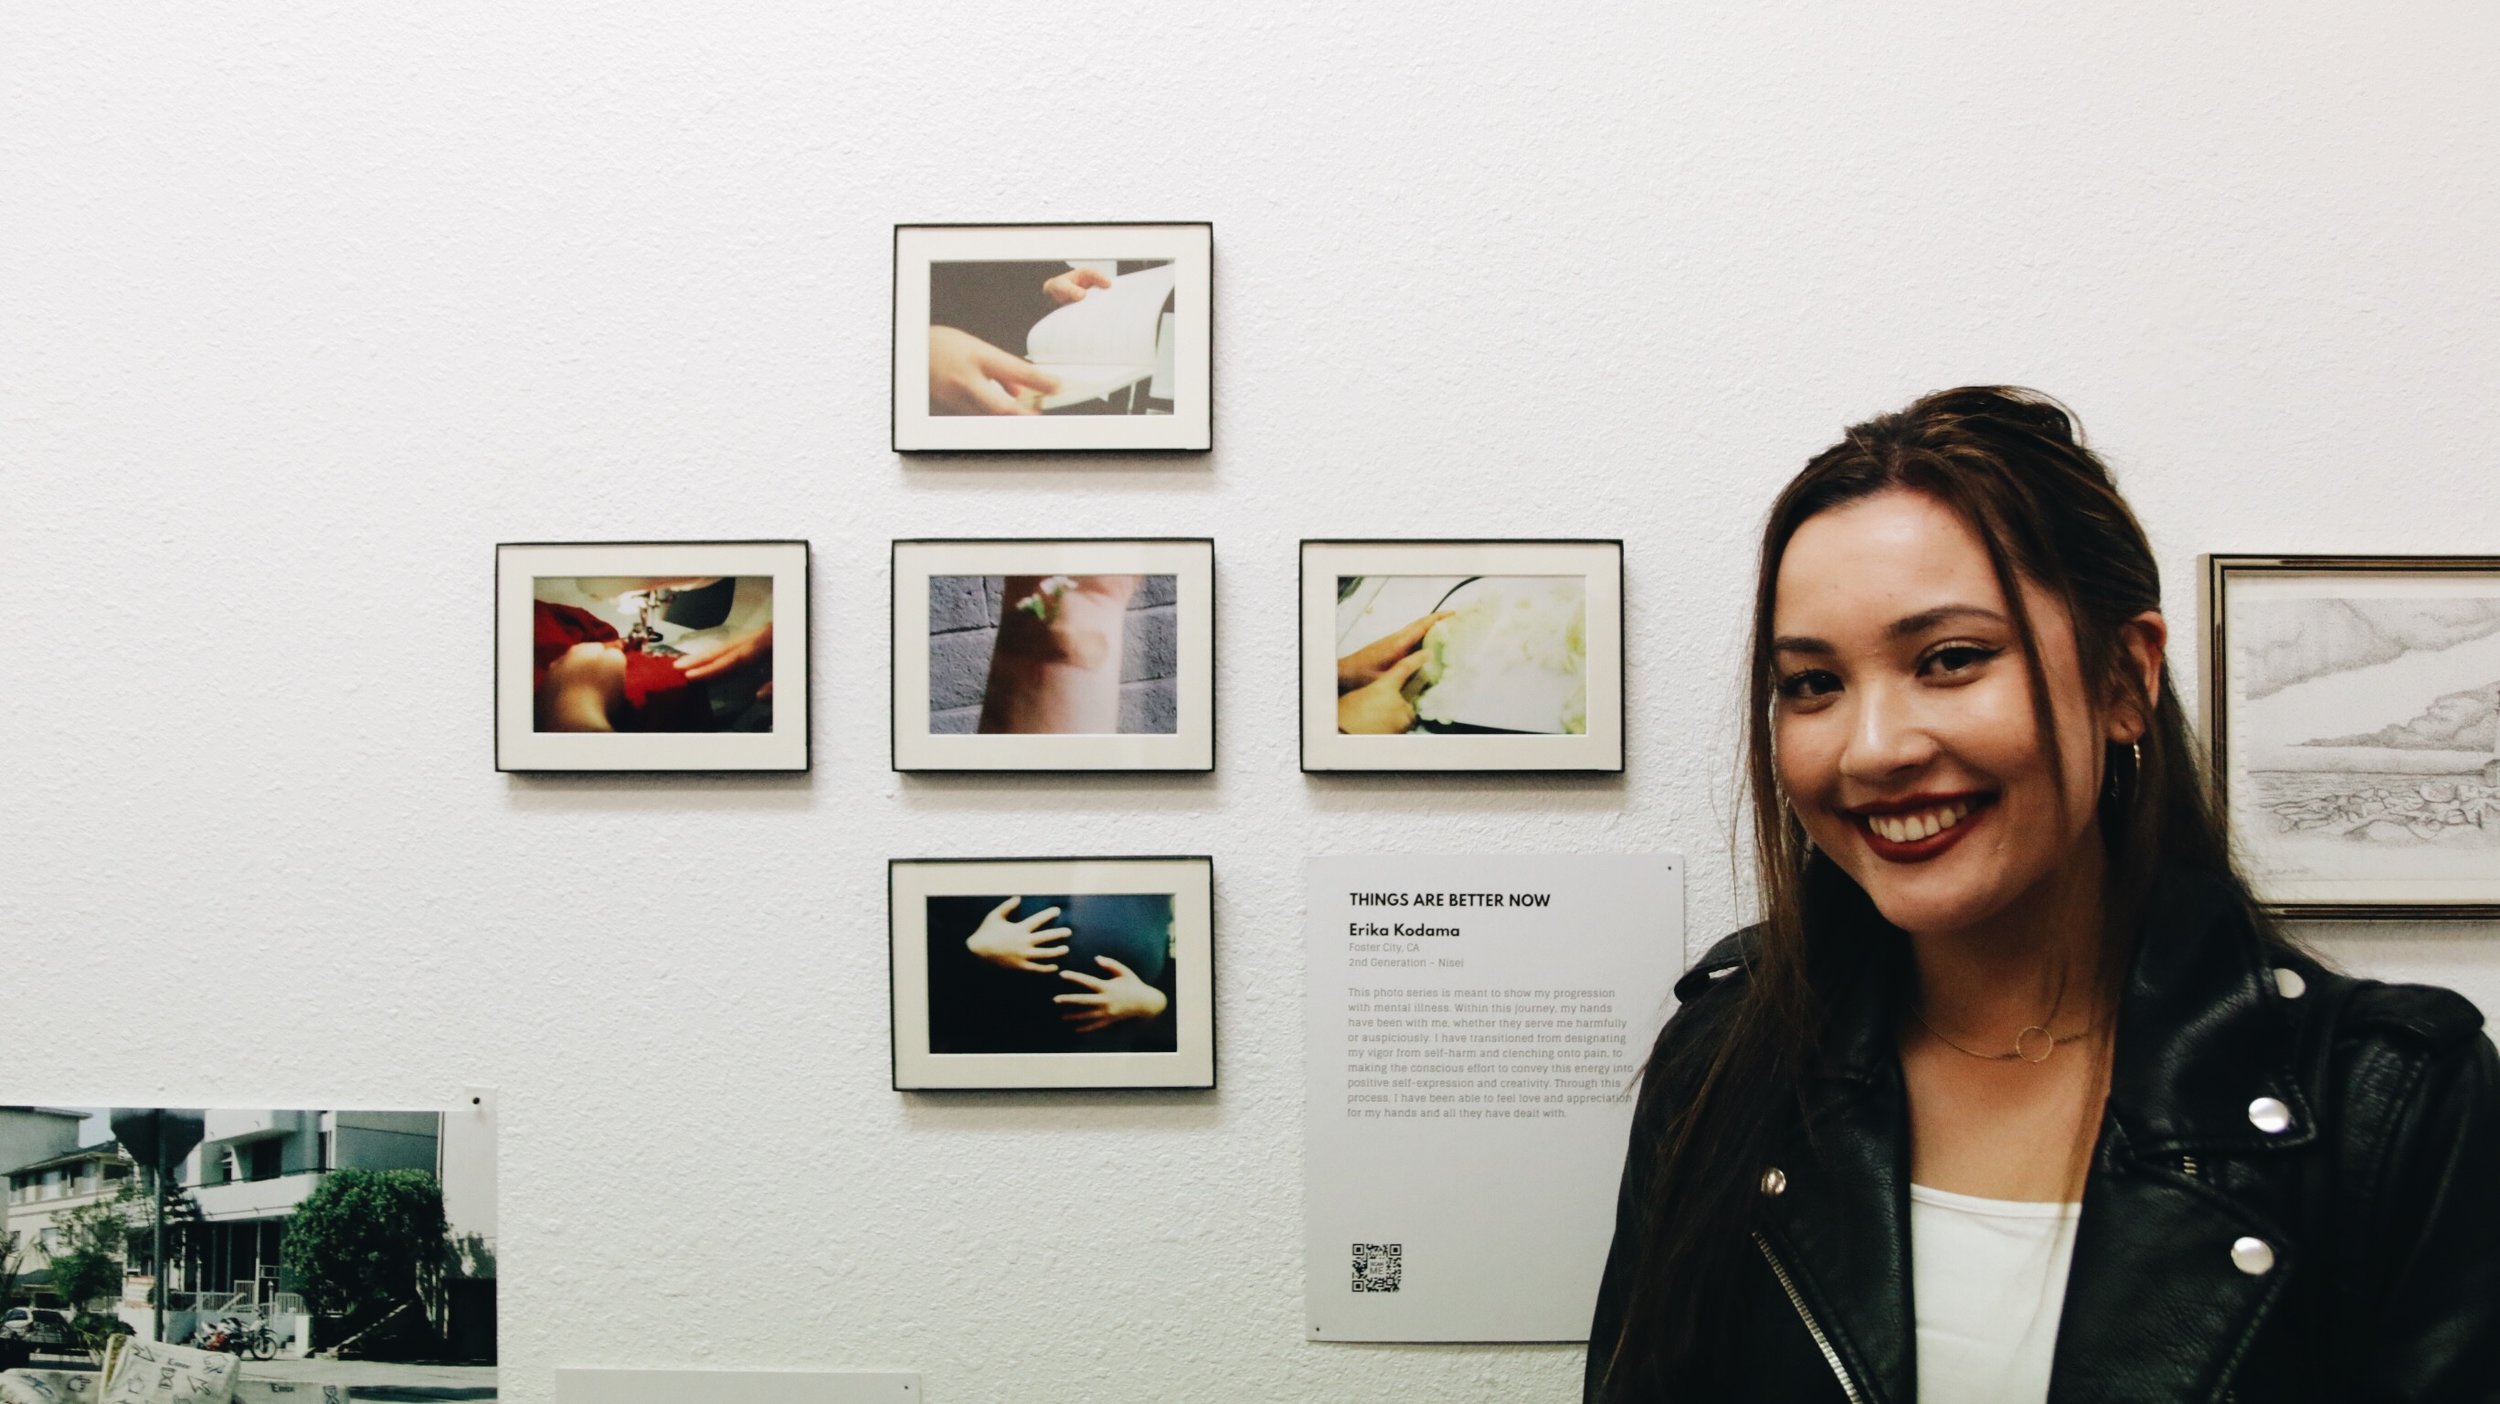 A woman smiles next to photographs called “These Are Better Now,” by Erika Kodoma.